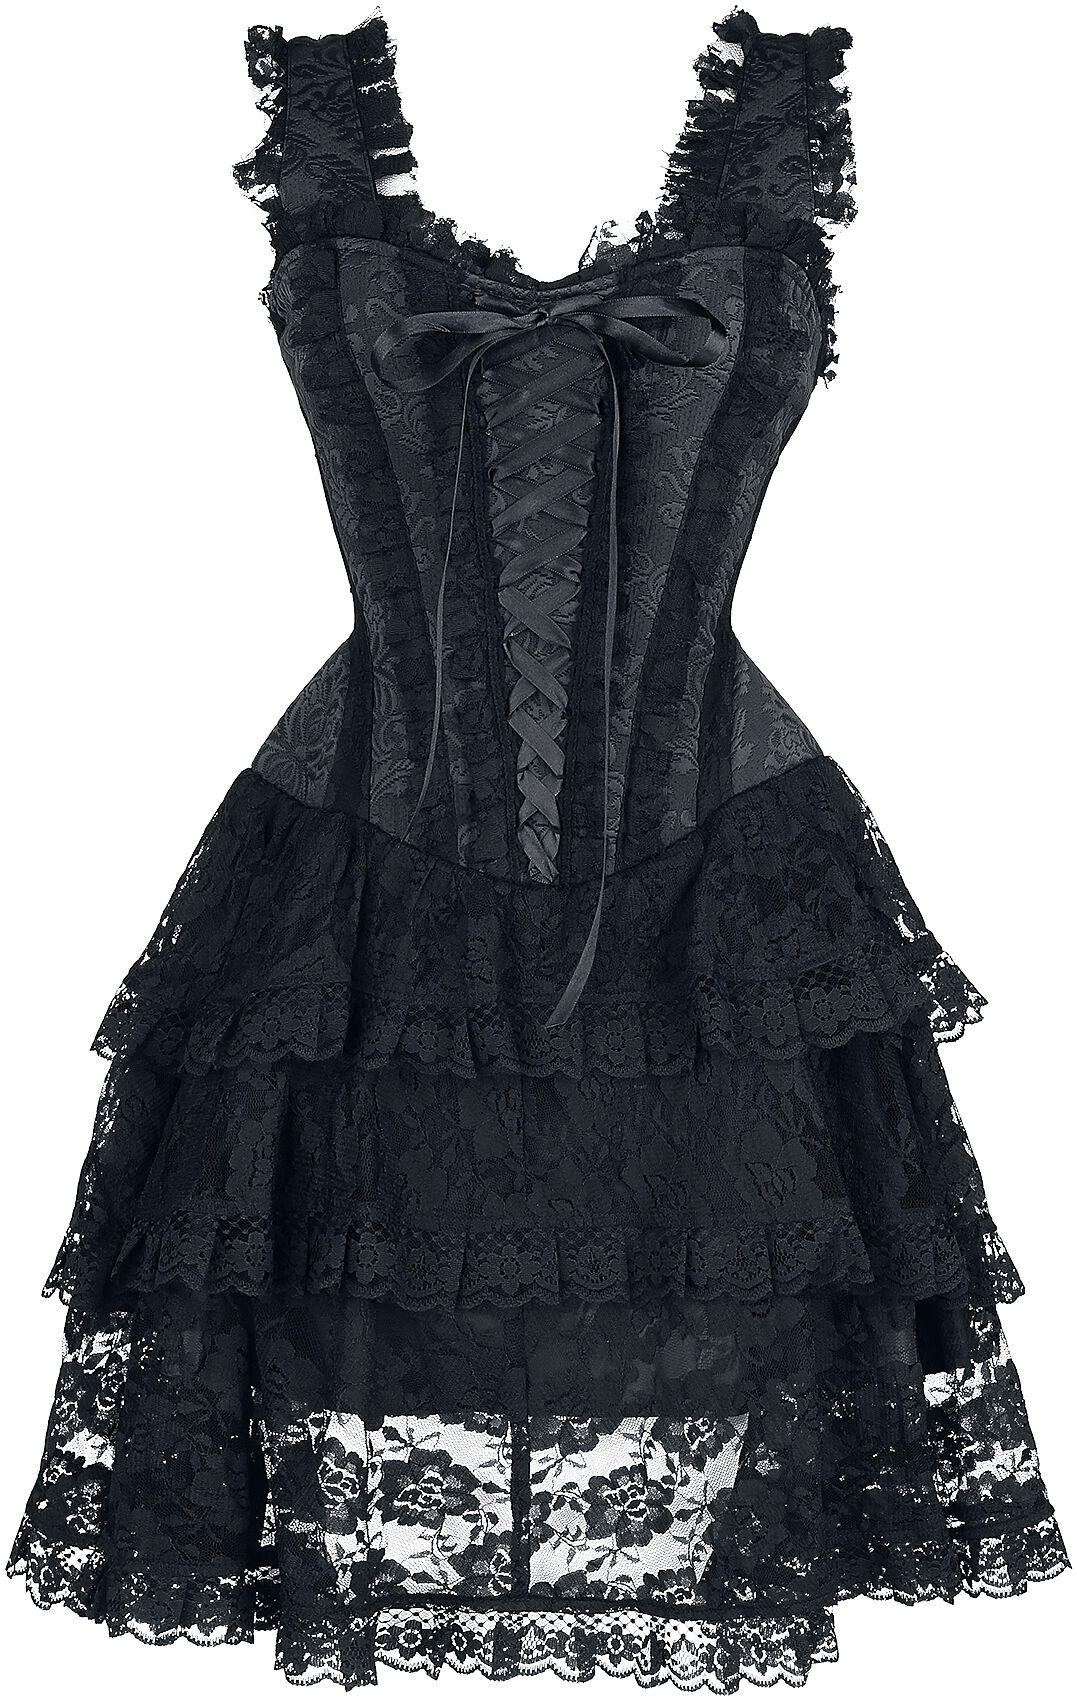 Image of Miniabito Gothic di Gothicana by EMP - Short Corset Dress with Lace - S a XL - Donna - nero